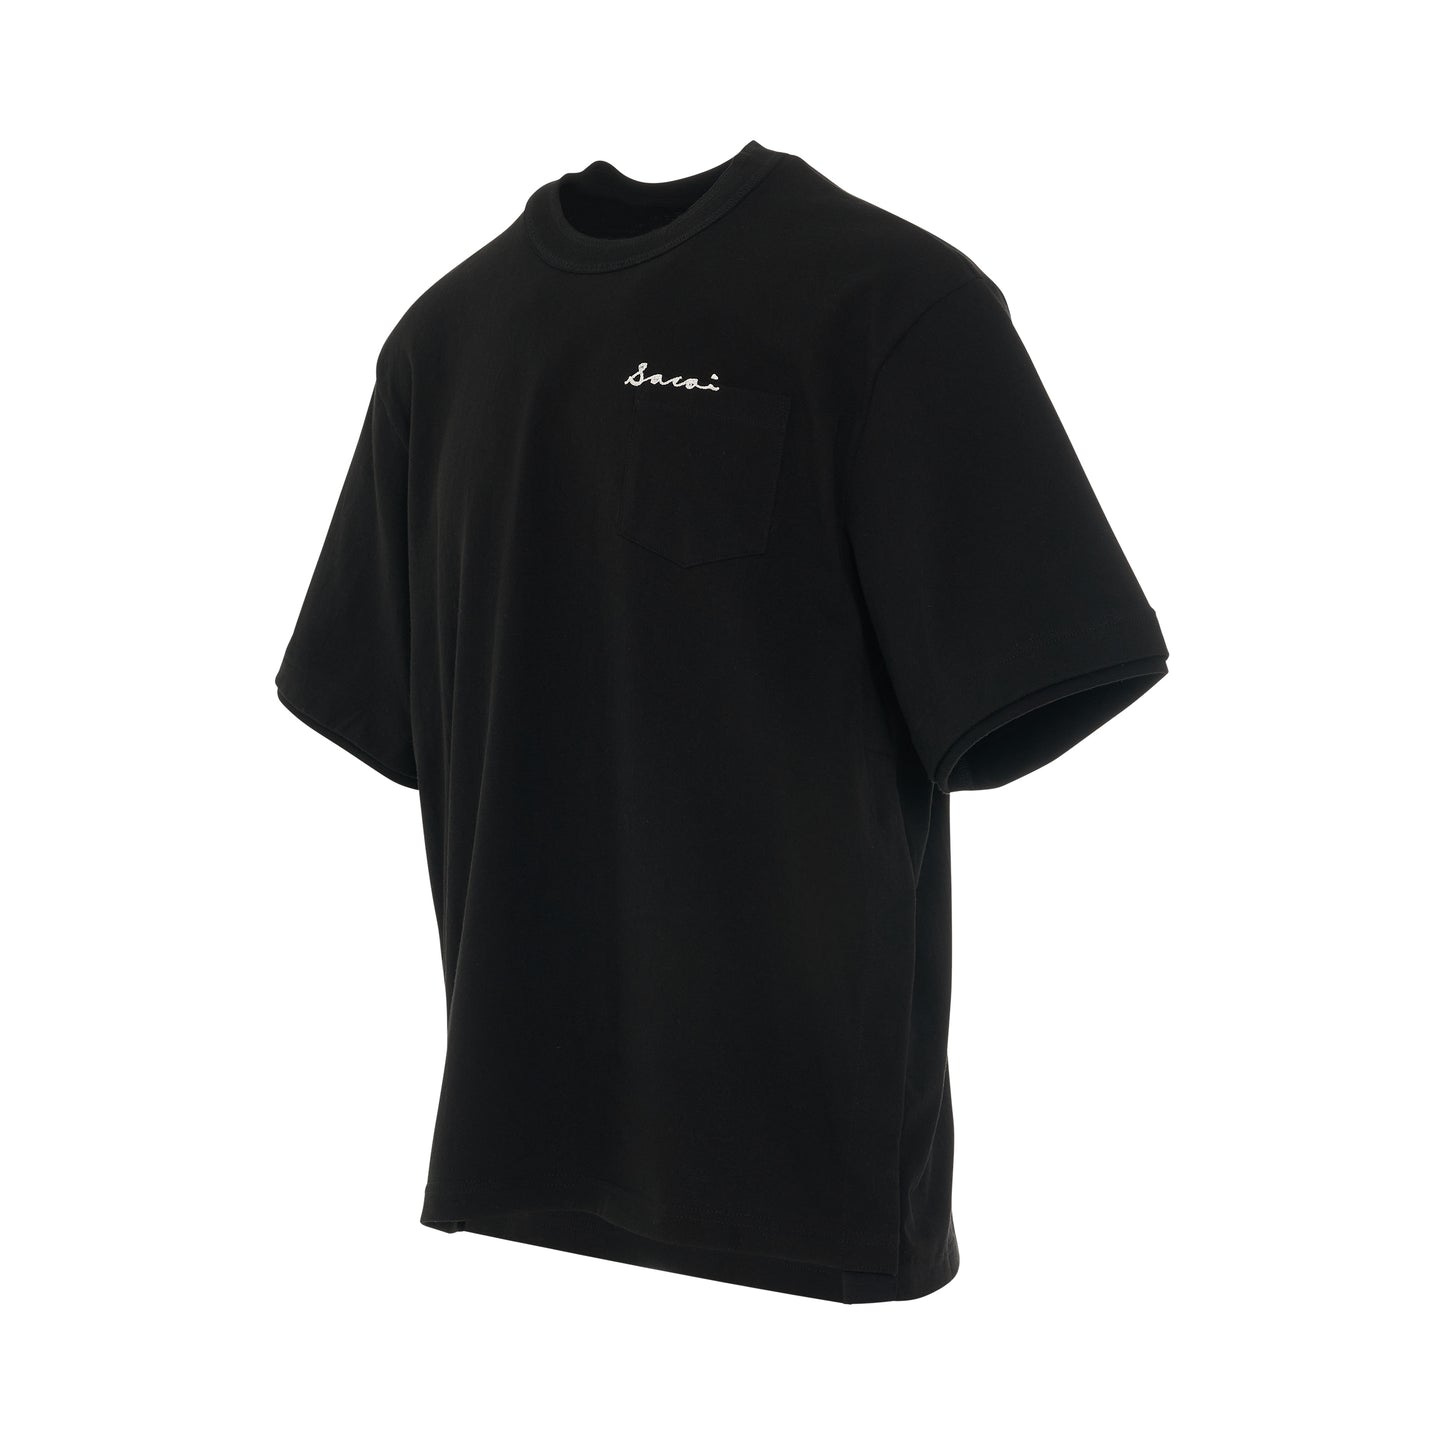 Cotton Twill T-Shirt with Pocket in Black